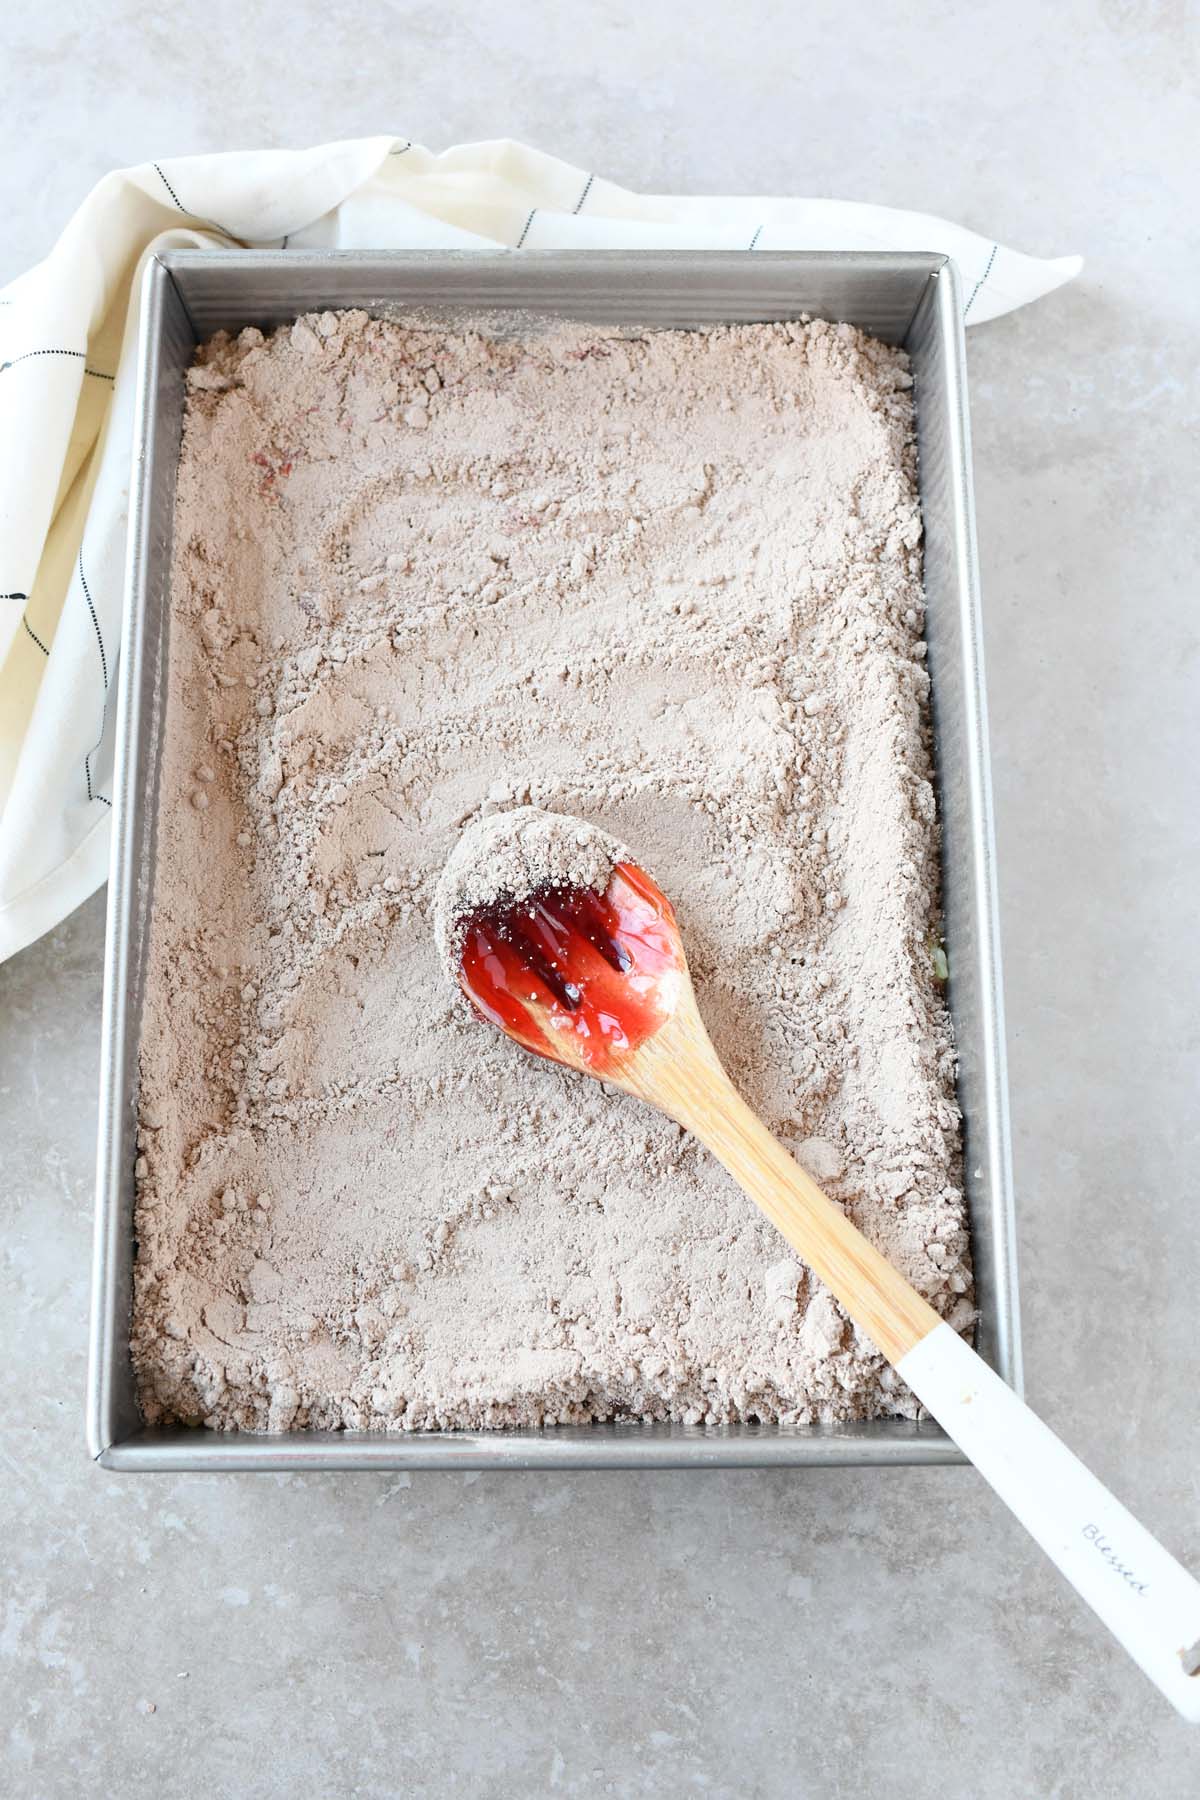 Smooth dry cake mix in a cake pan.